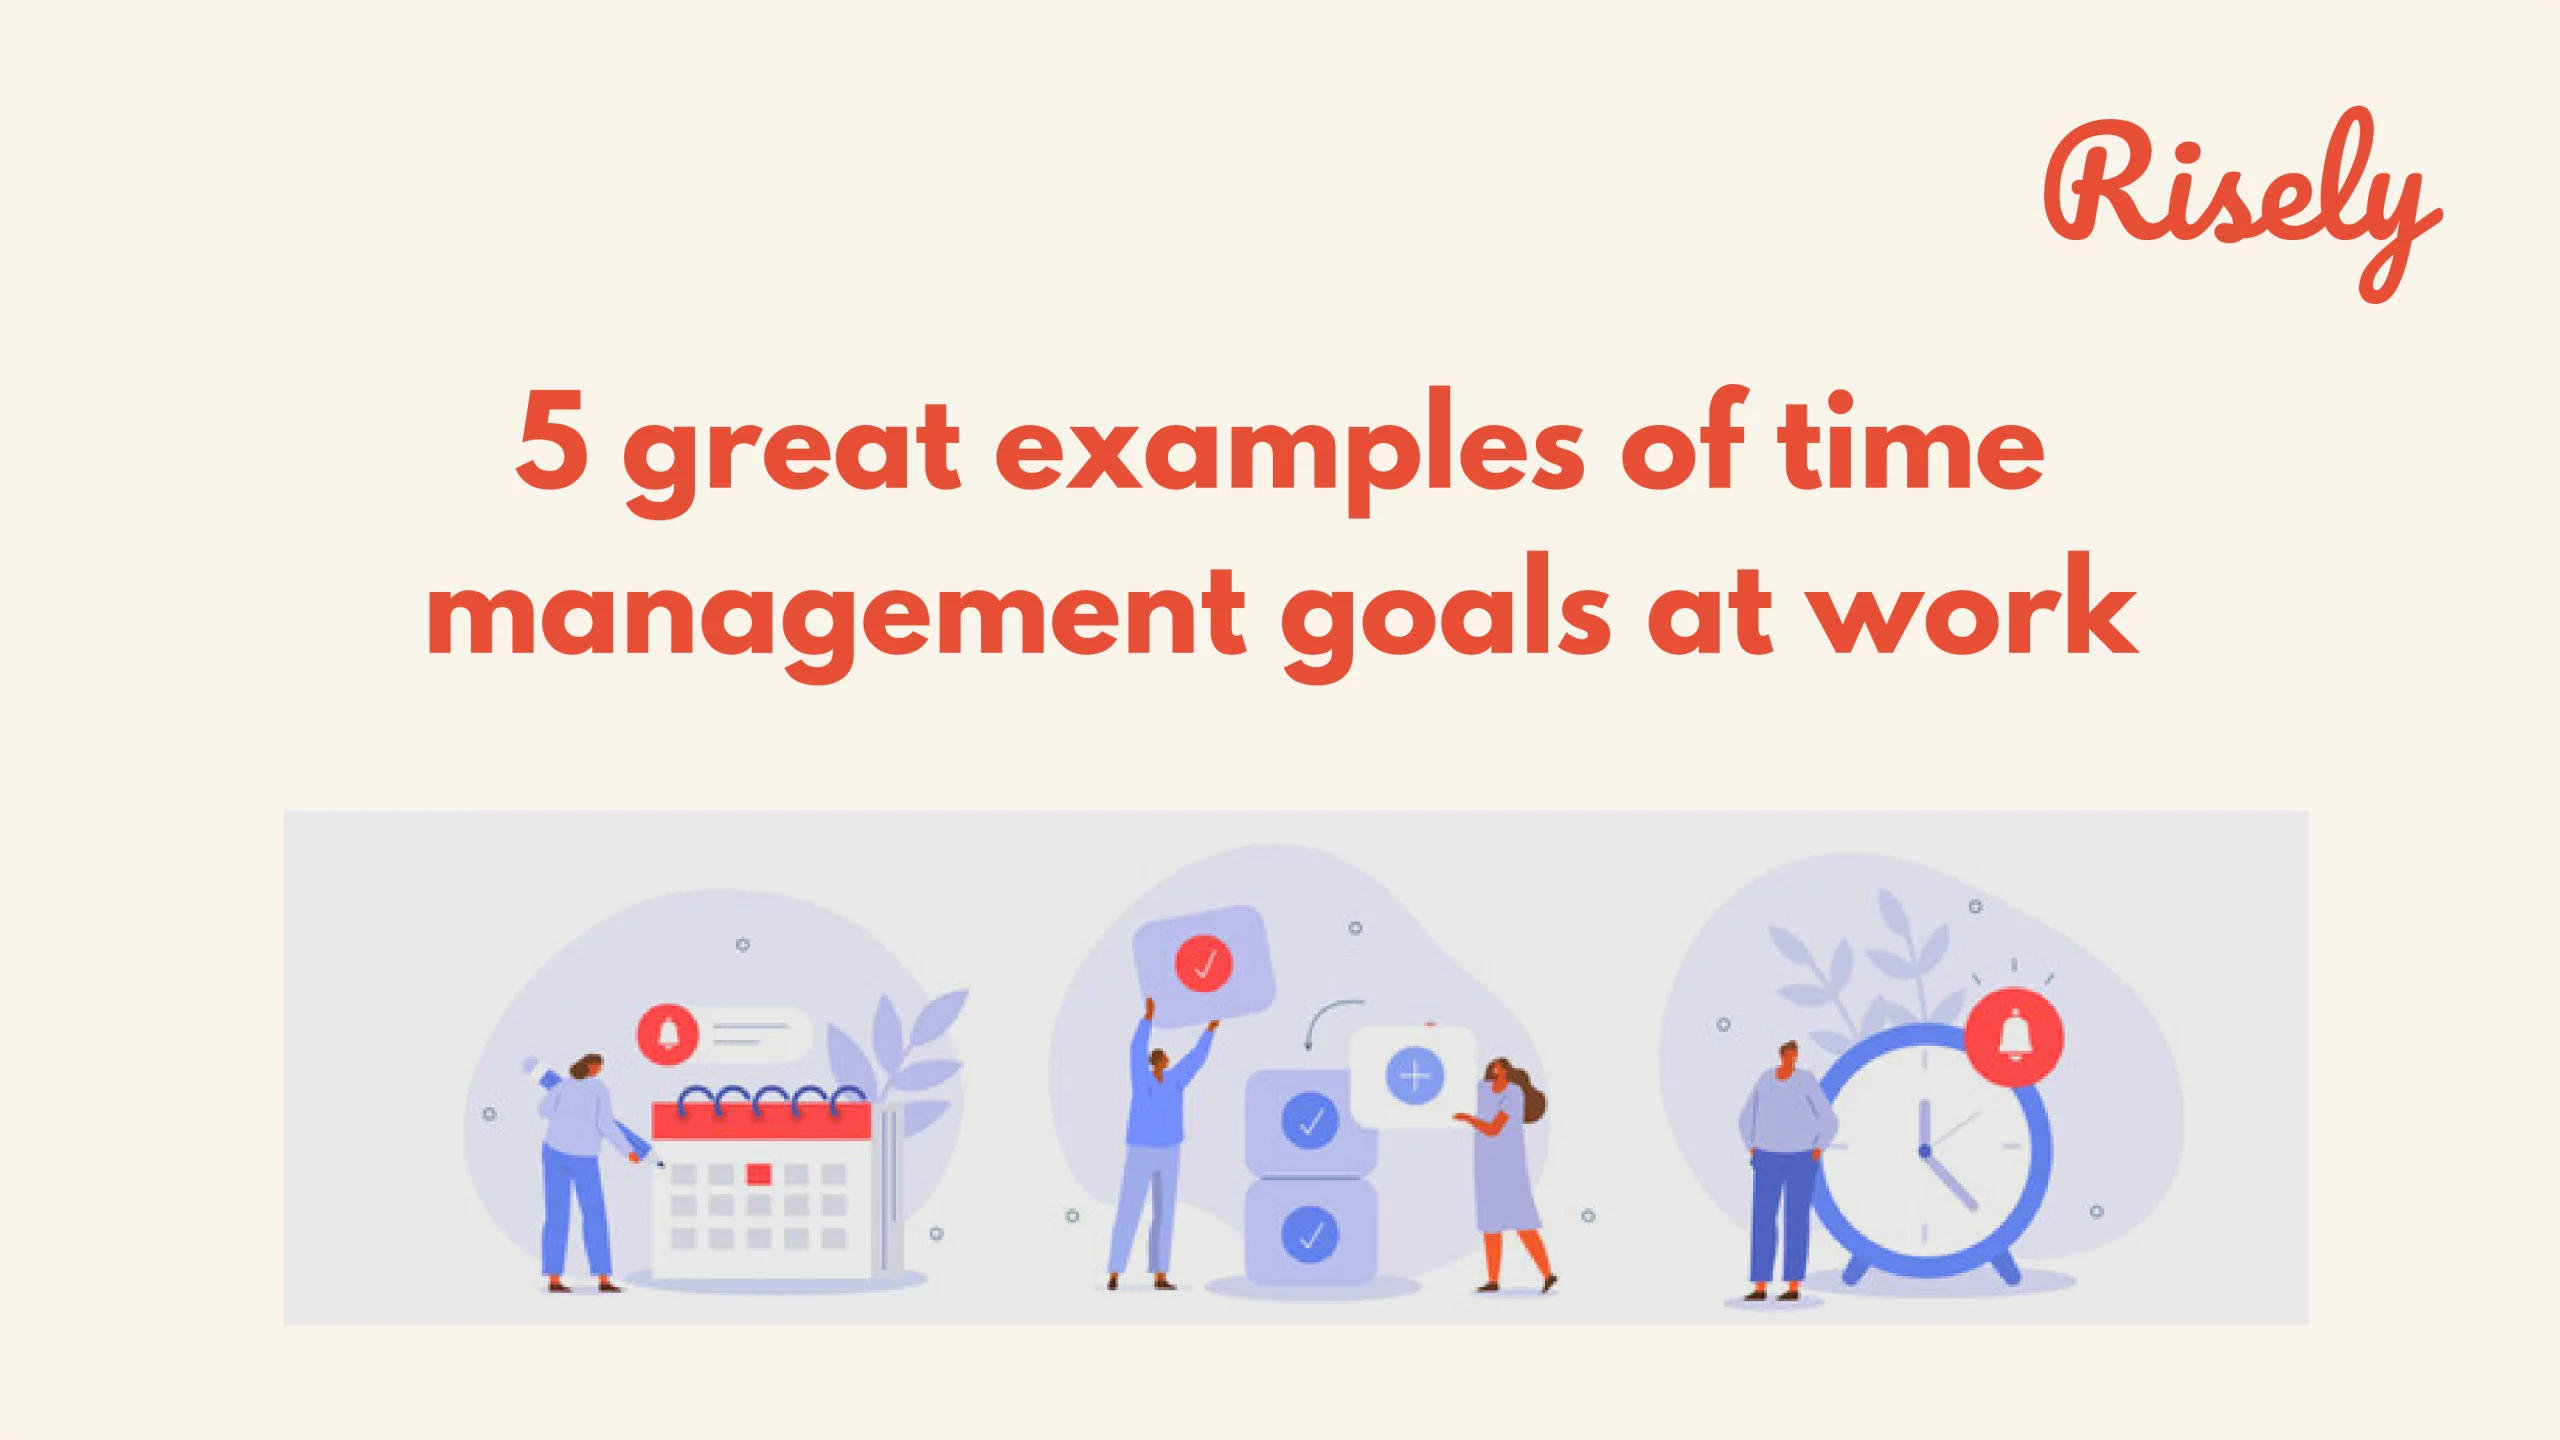 5 great examples of time management goals at work